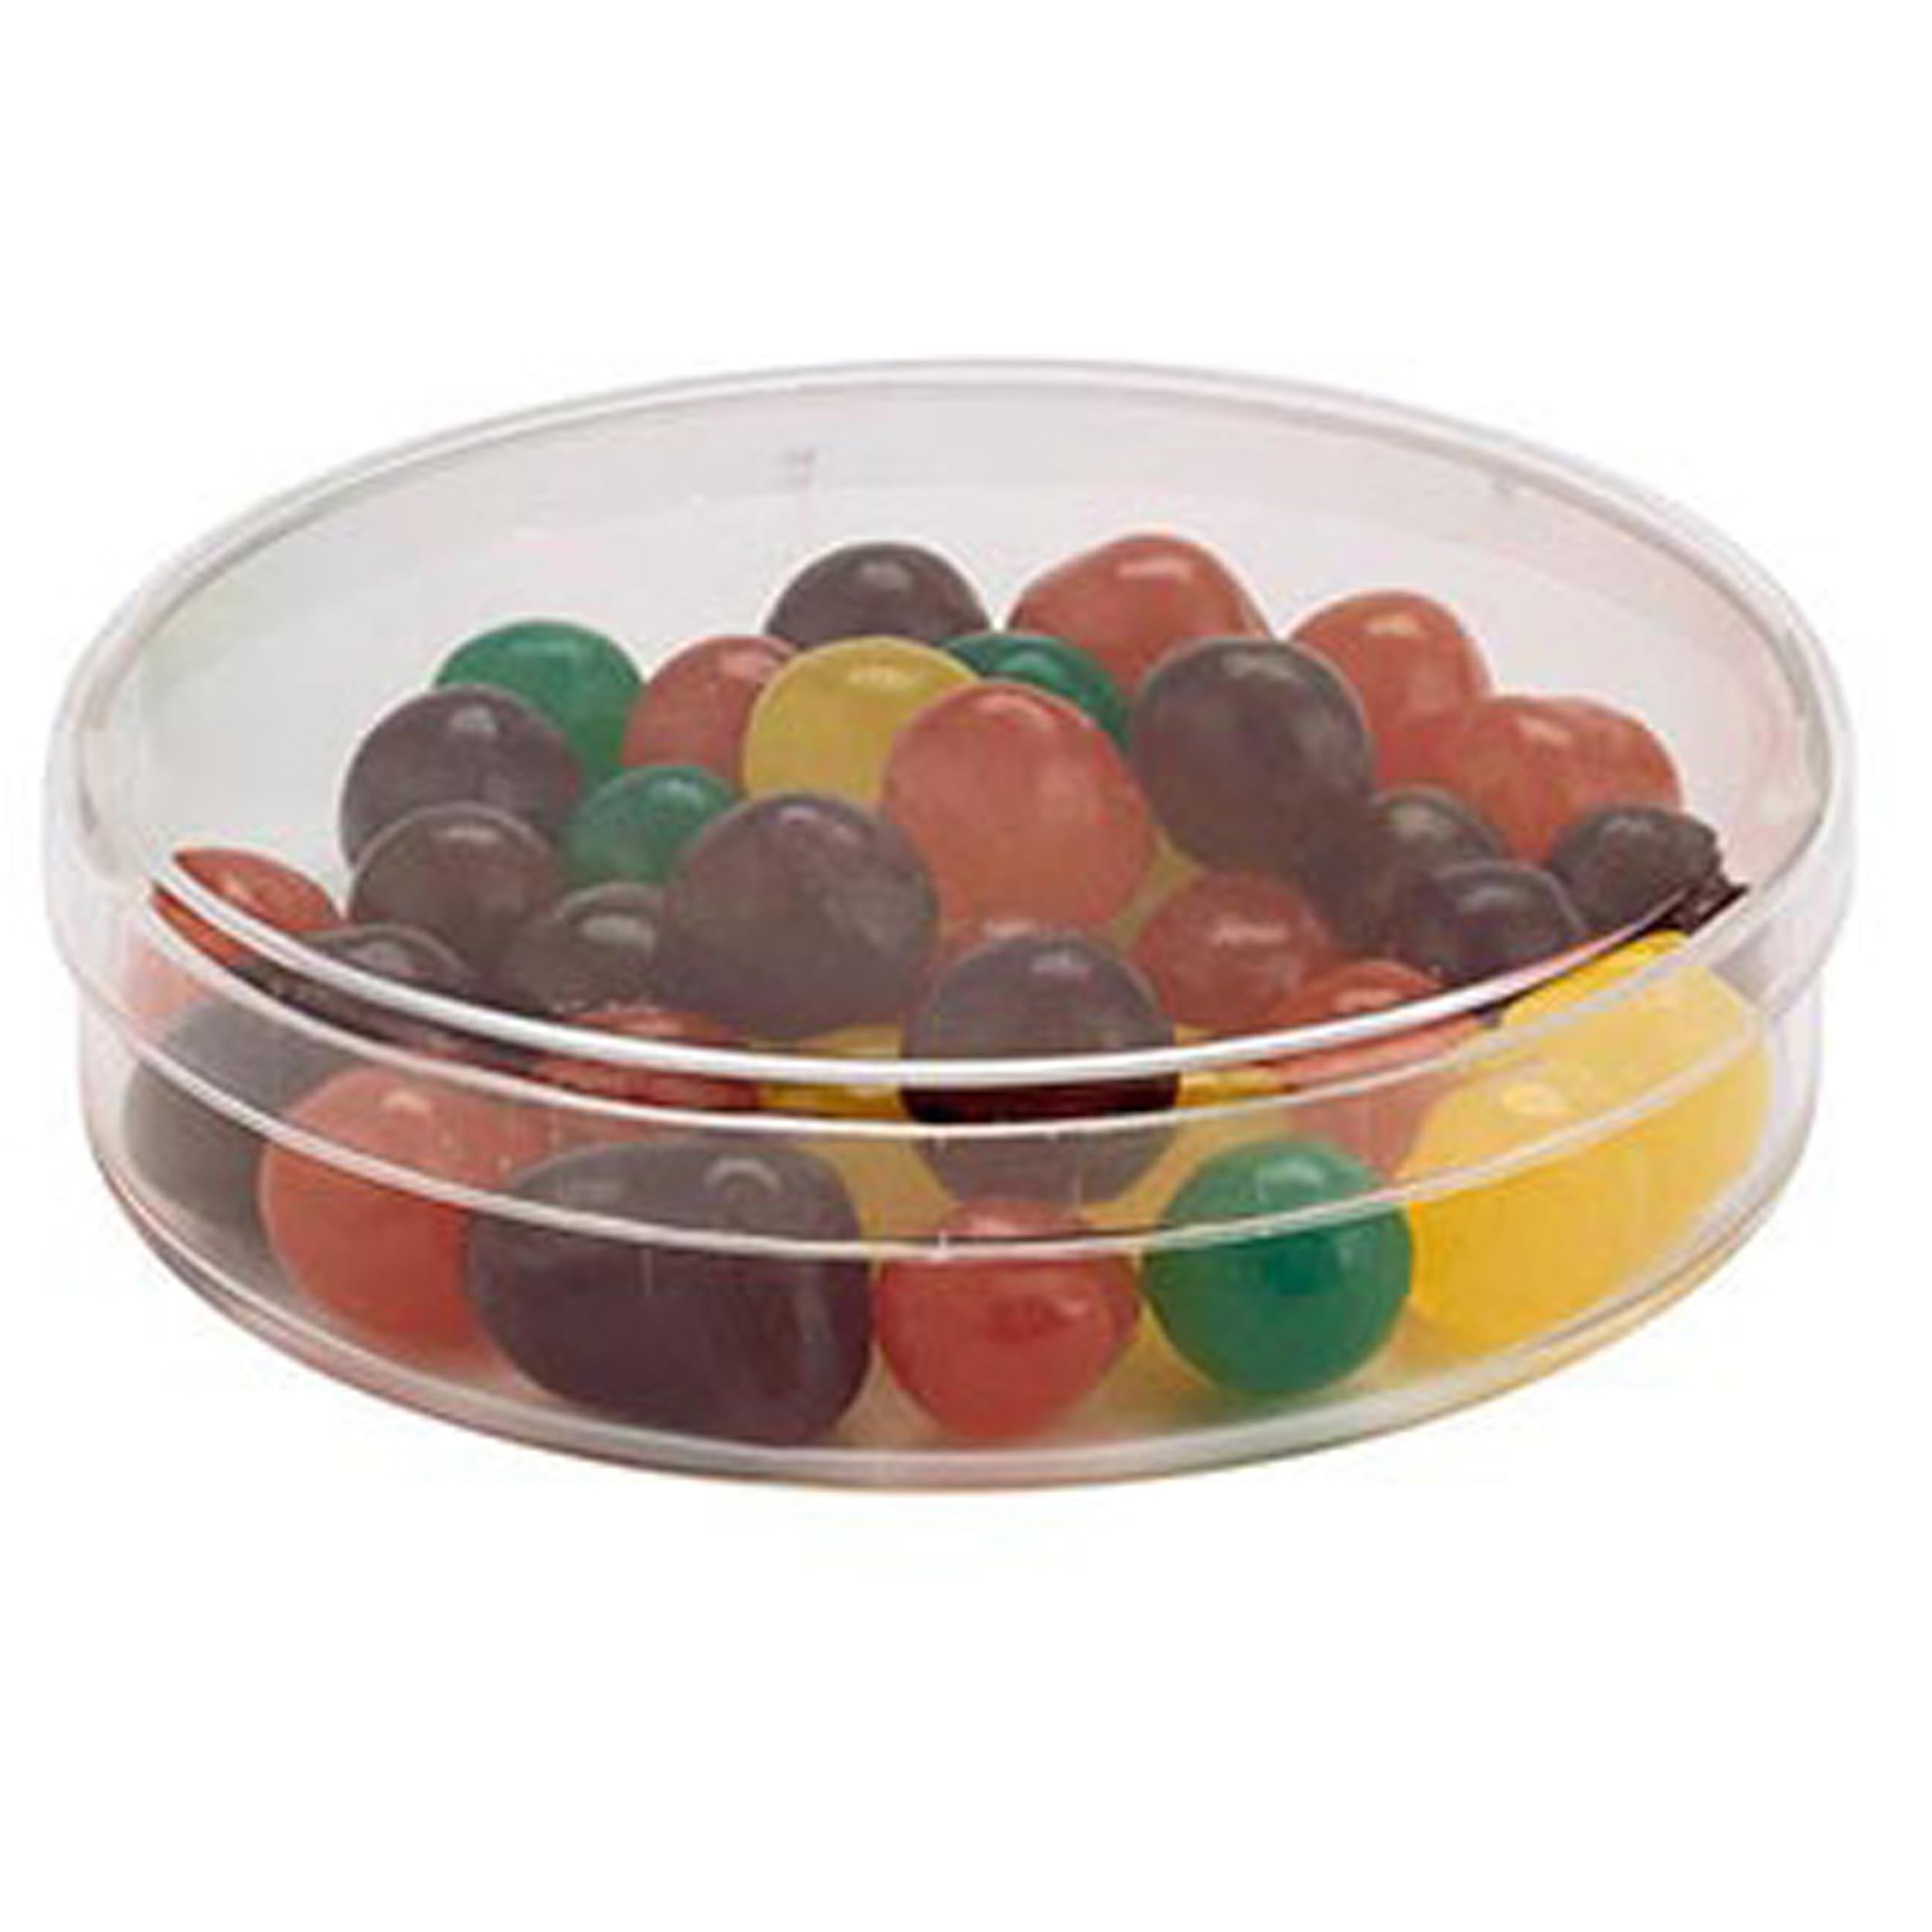 Pioneer Plastics 032C Clear Small Round Petri Dish Plastic Container, 2.75" W x 0.625" H, Pack of 12